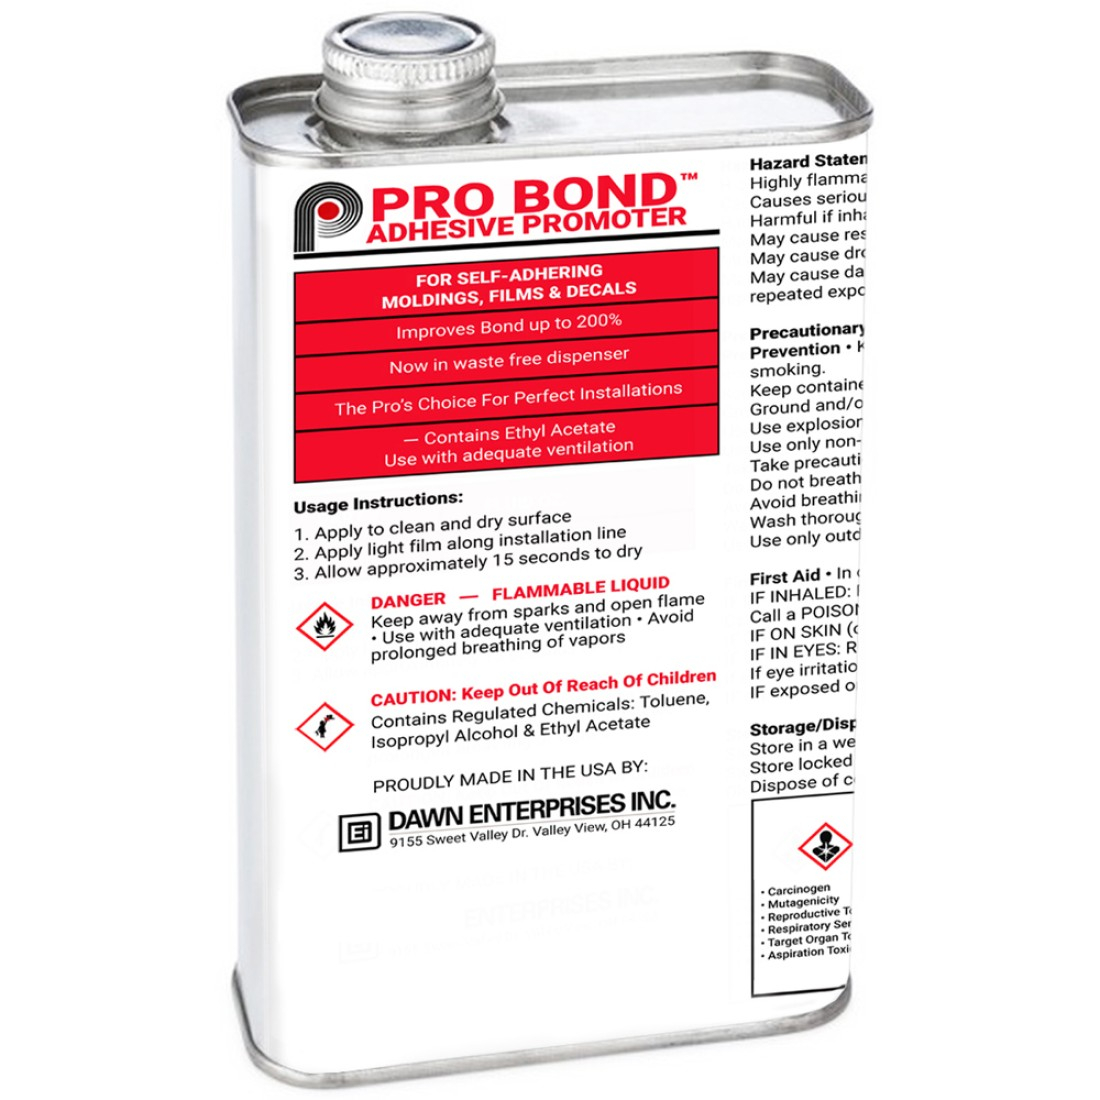 16 OZ can of Pro Bond Adhesive Promoter / Primer